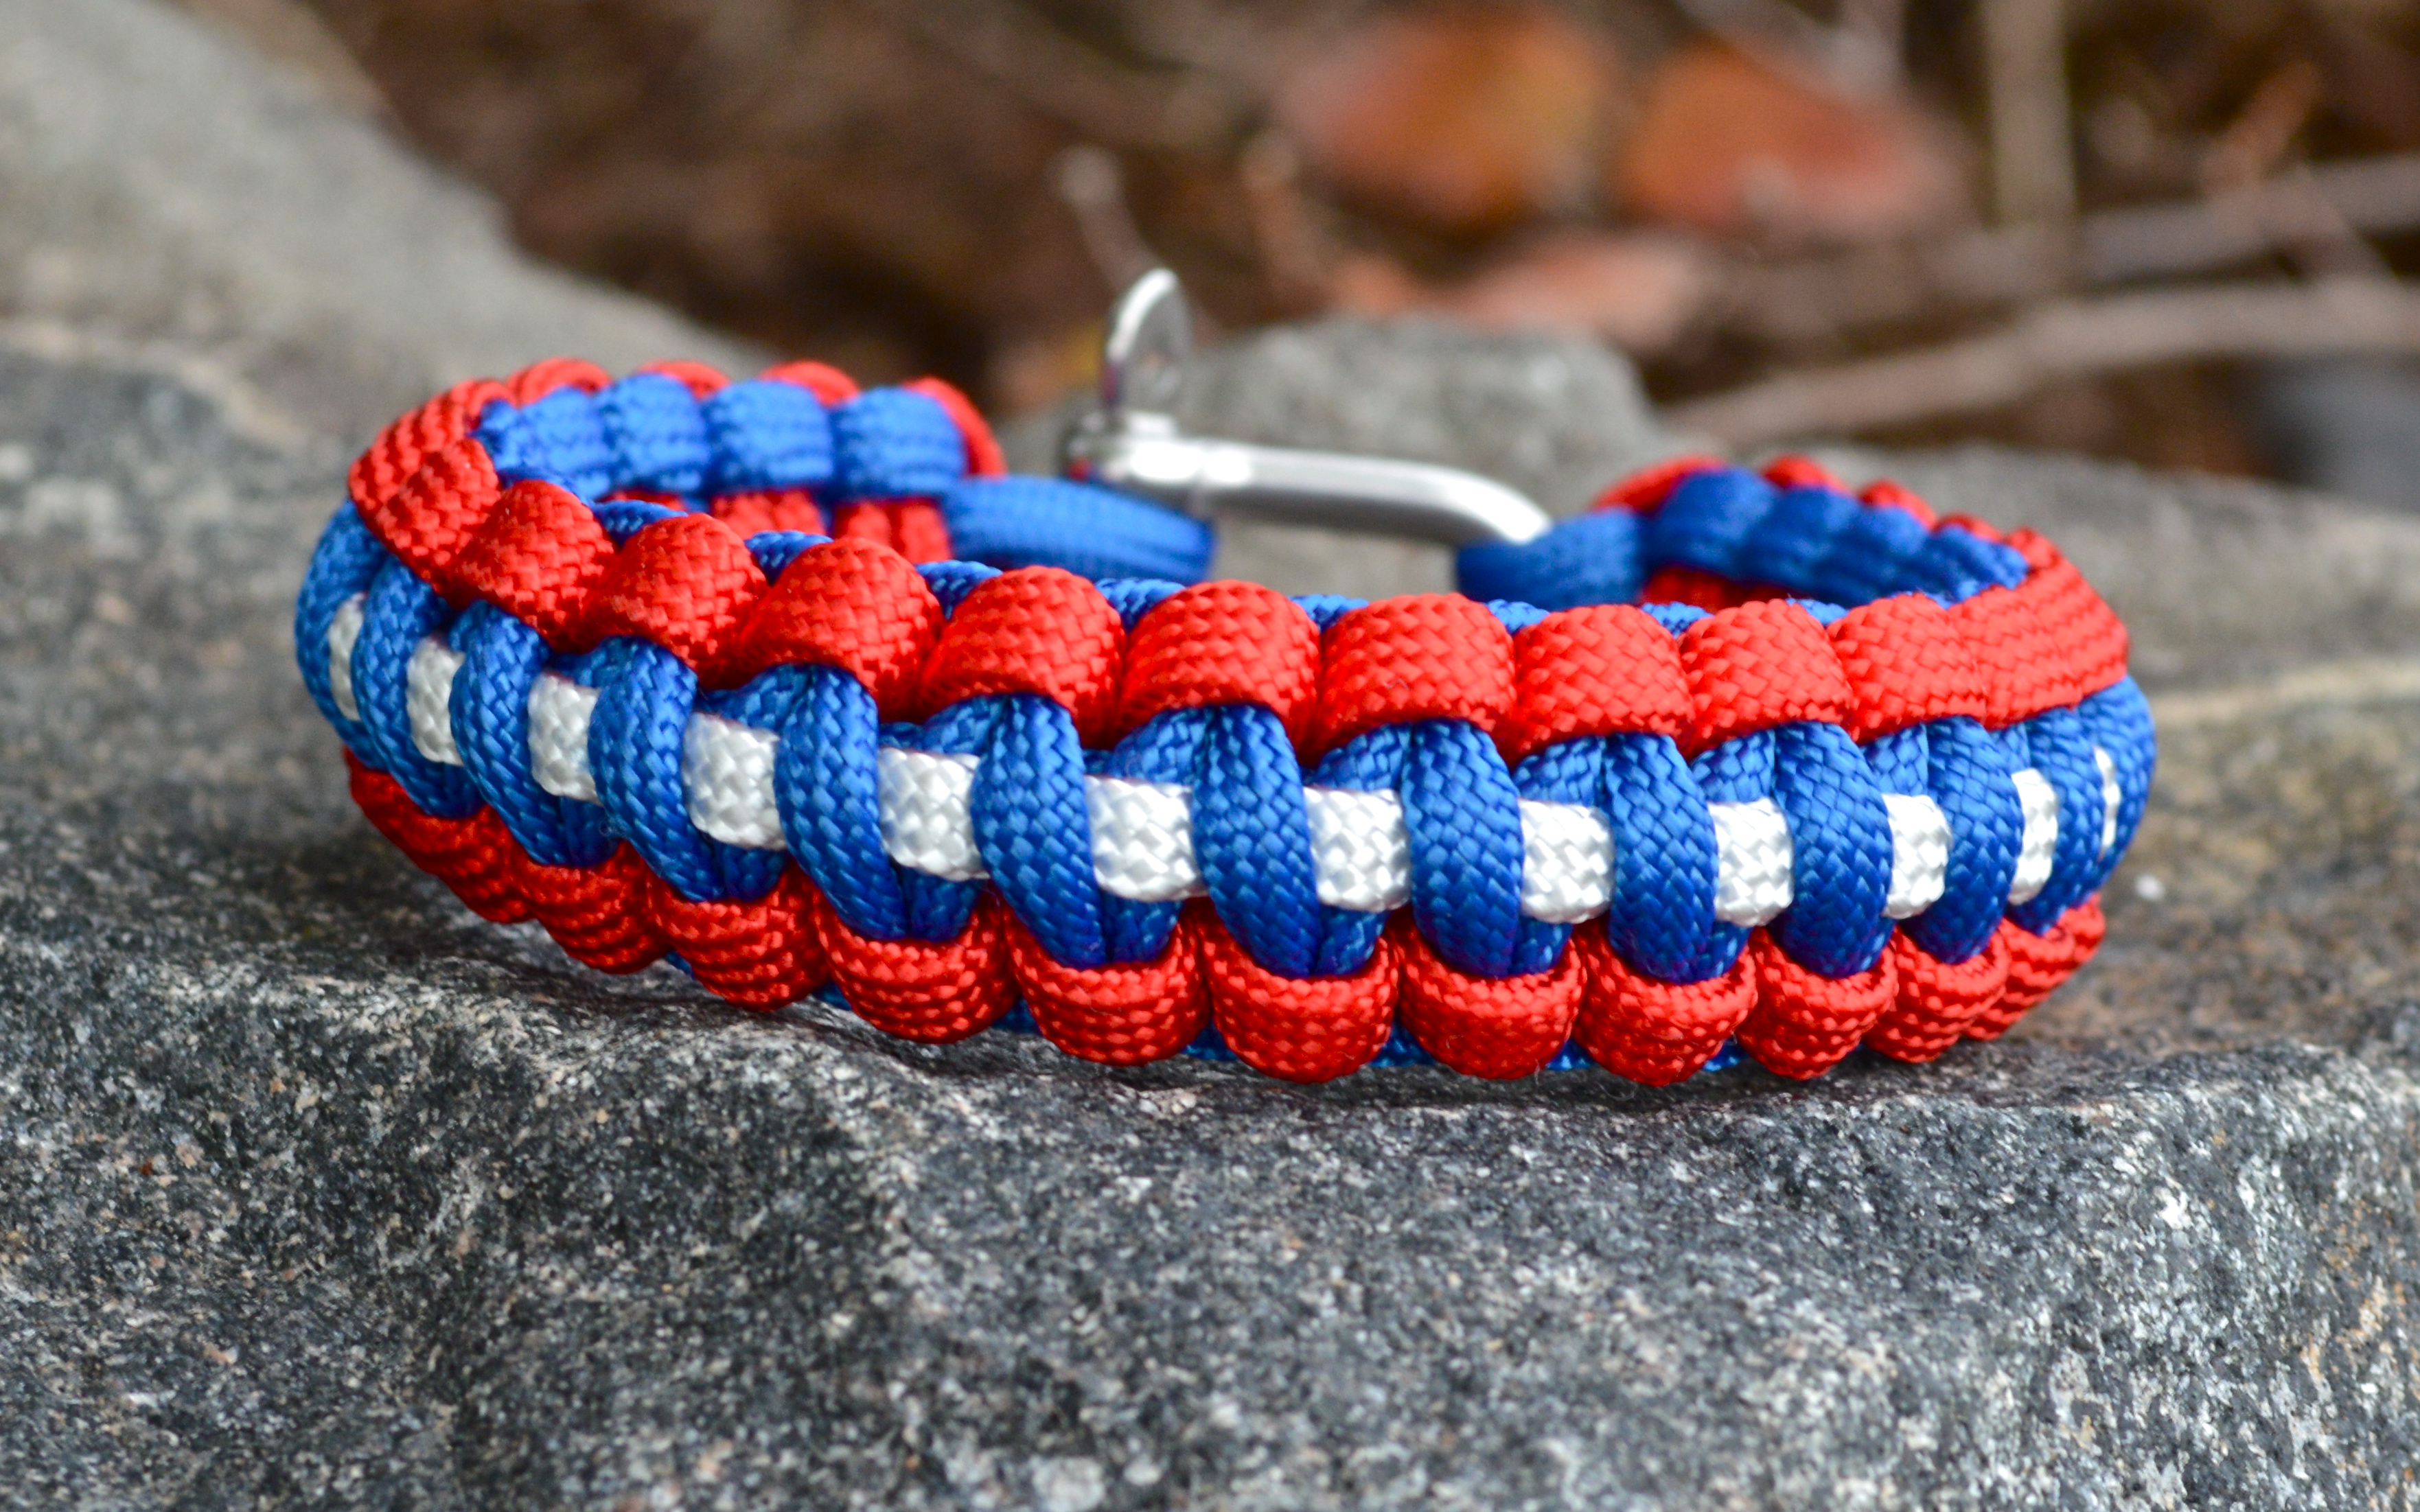 Rugged Apparel Redesigns and Bracelet